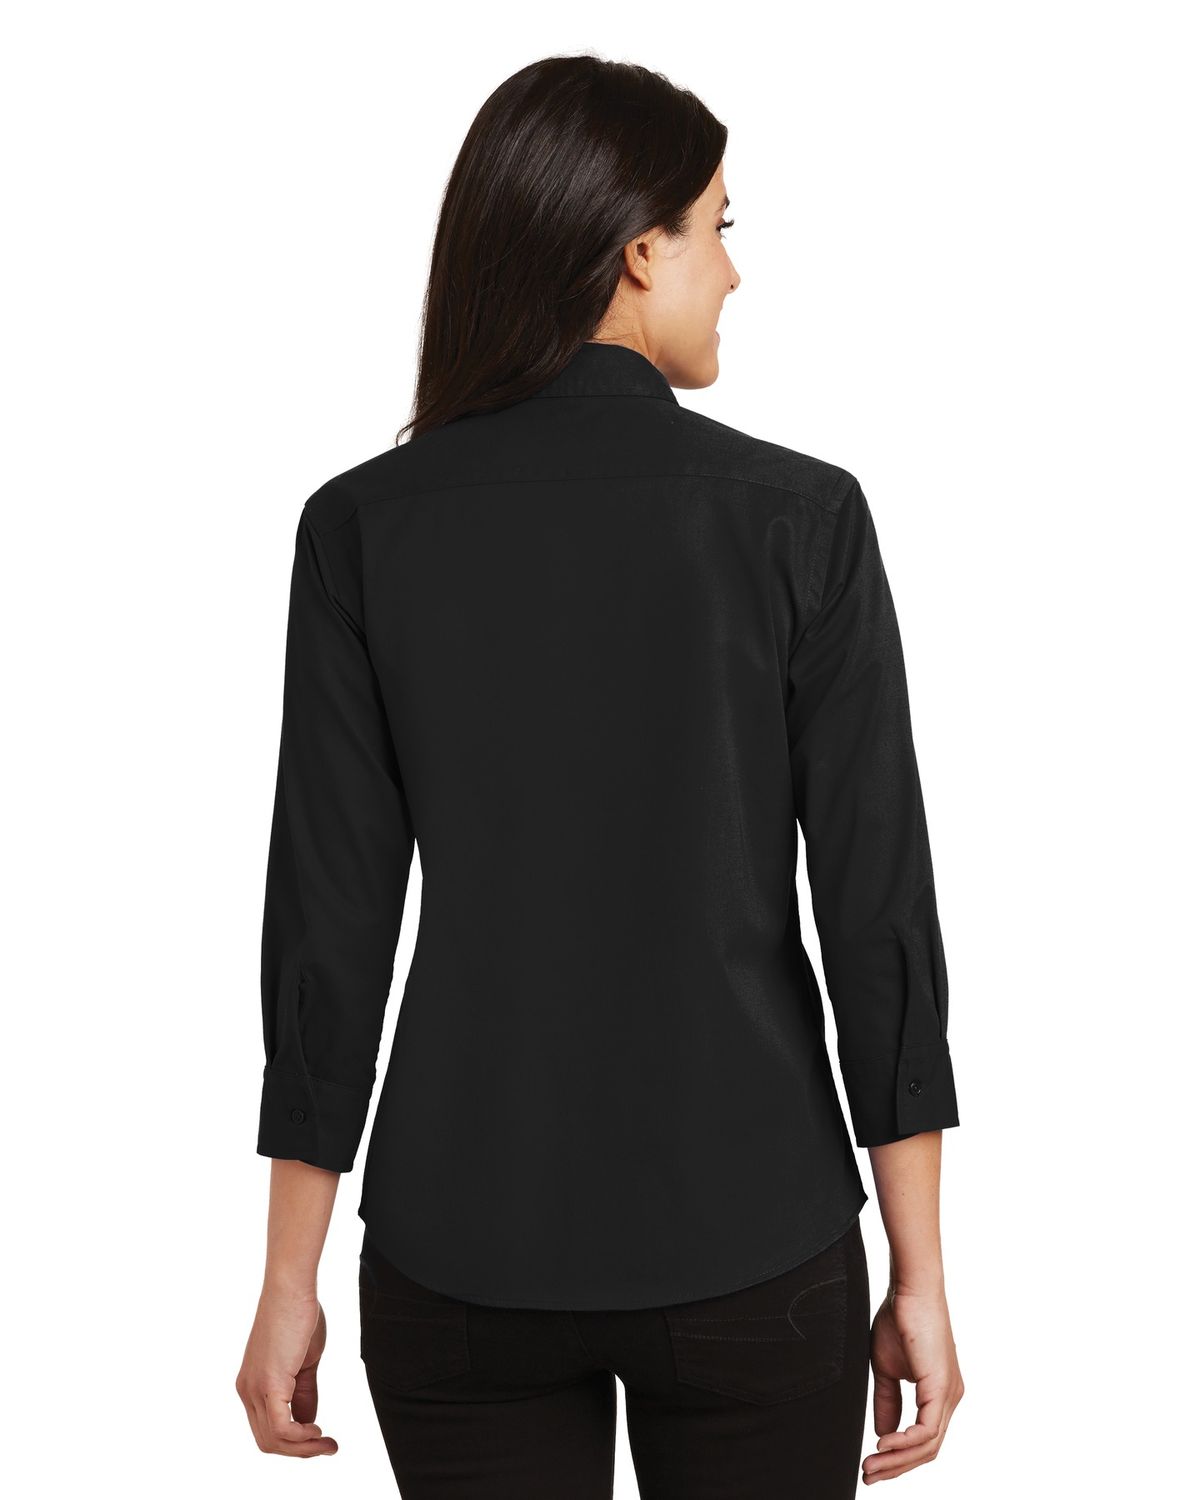 'Port Authority L612 Women’s 3/4-Sleeve Easy Care Shirt'